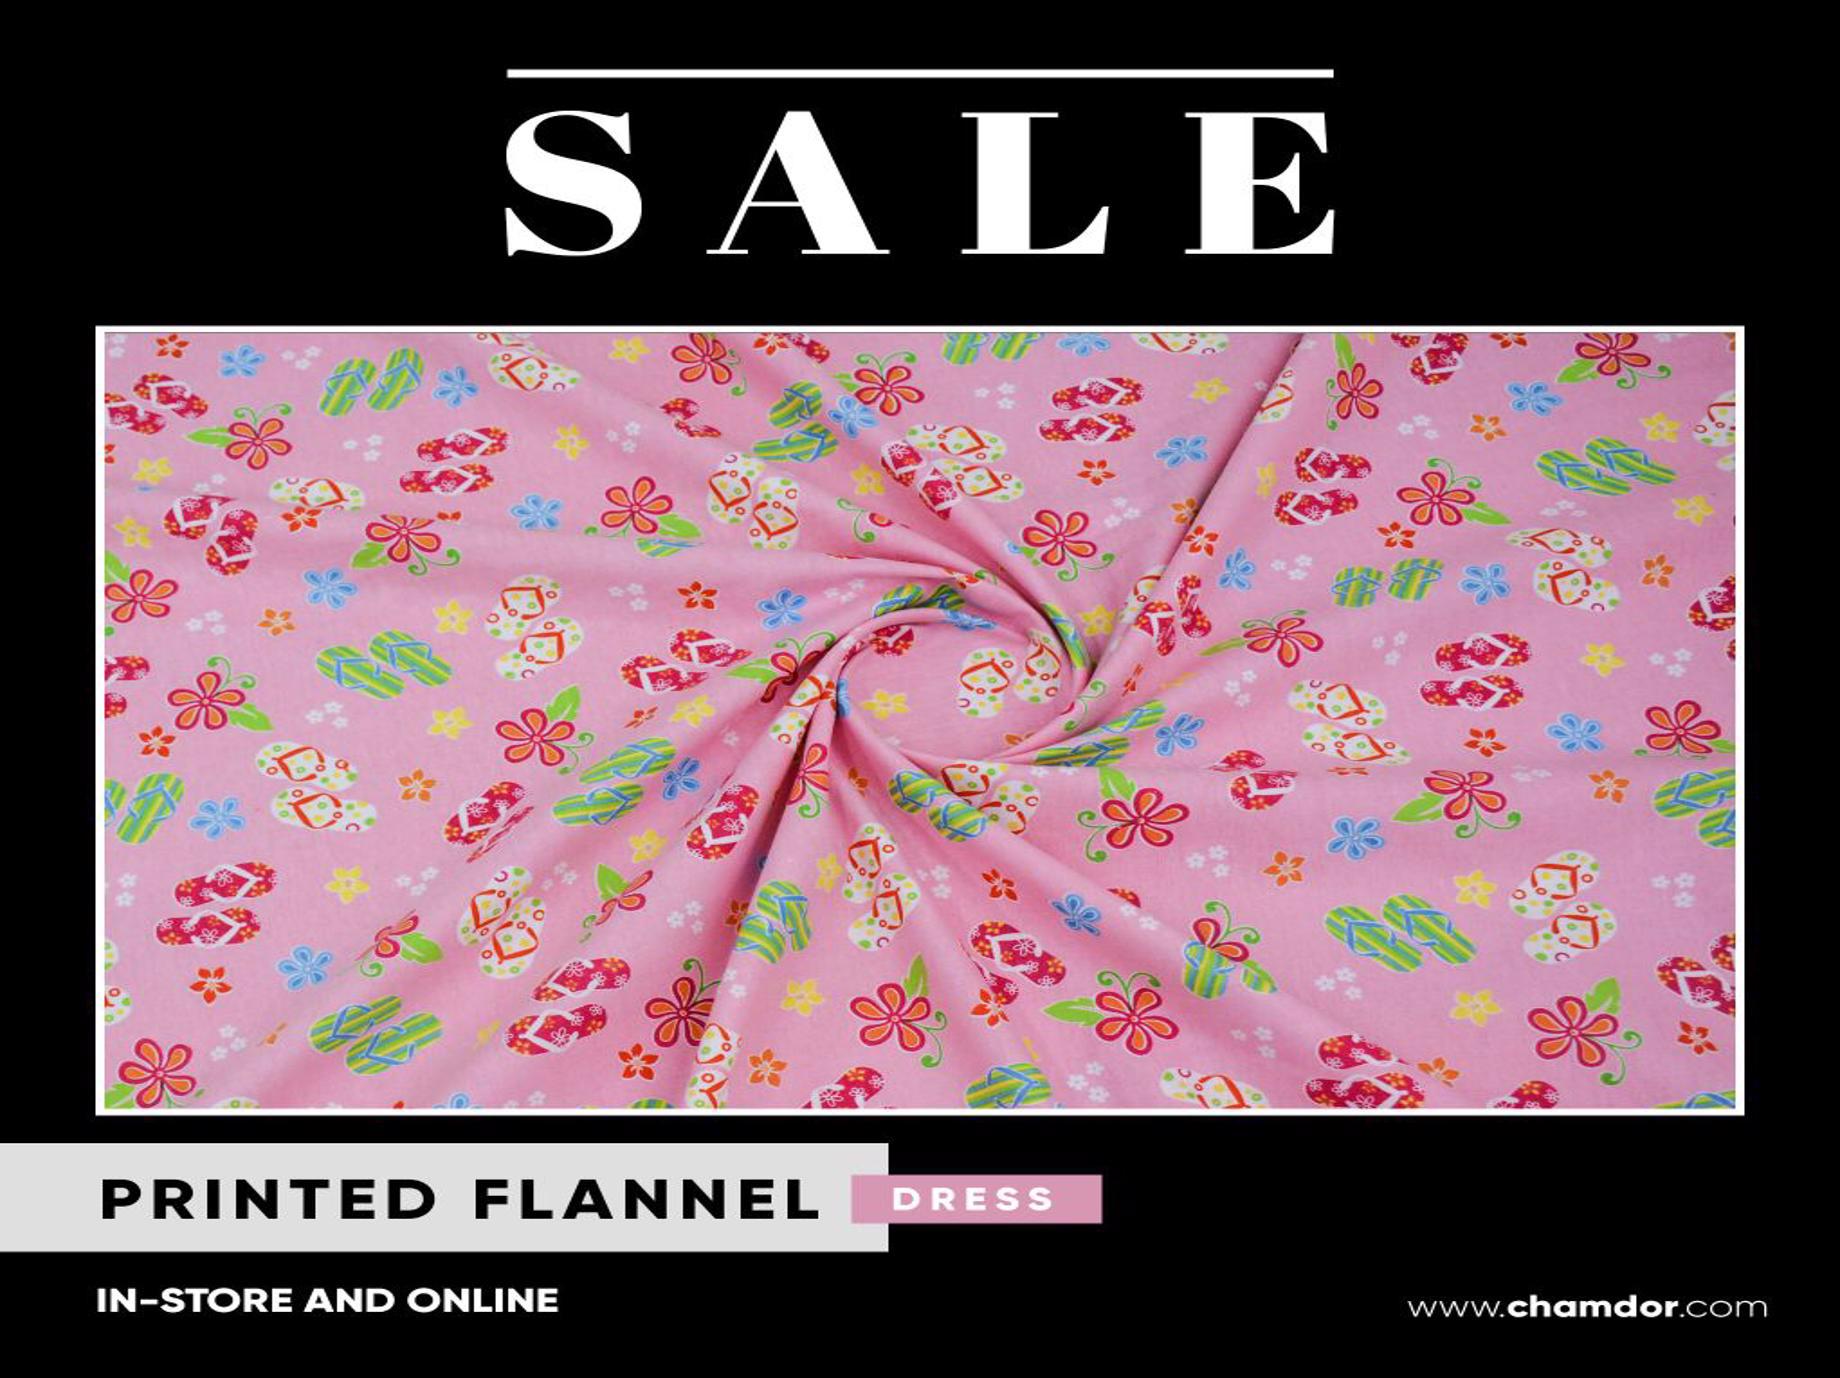 Flannel - SALE